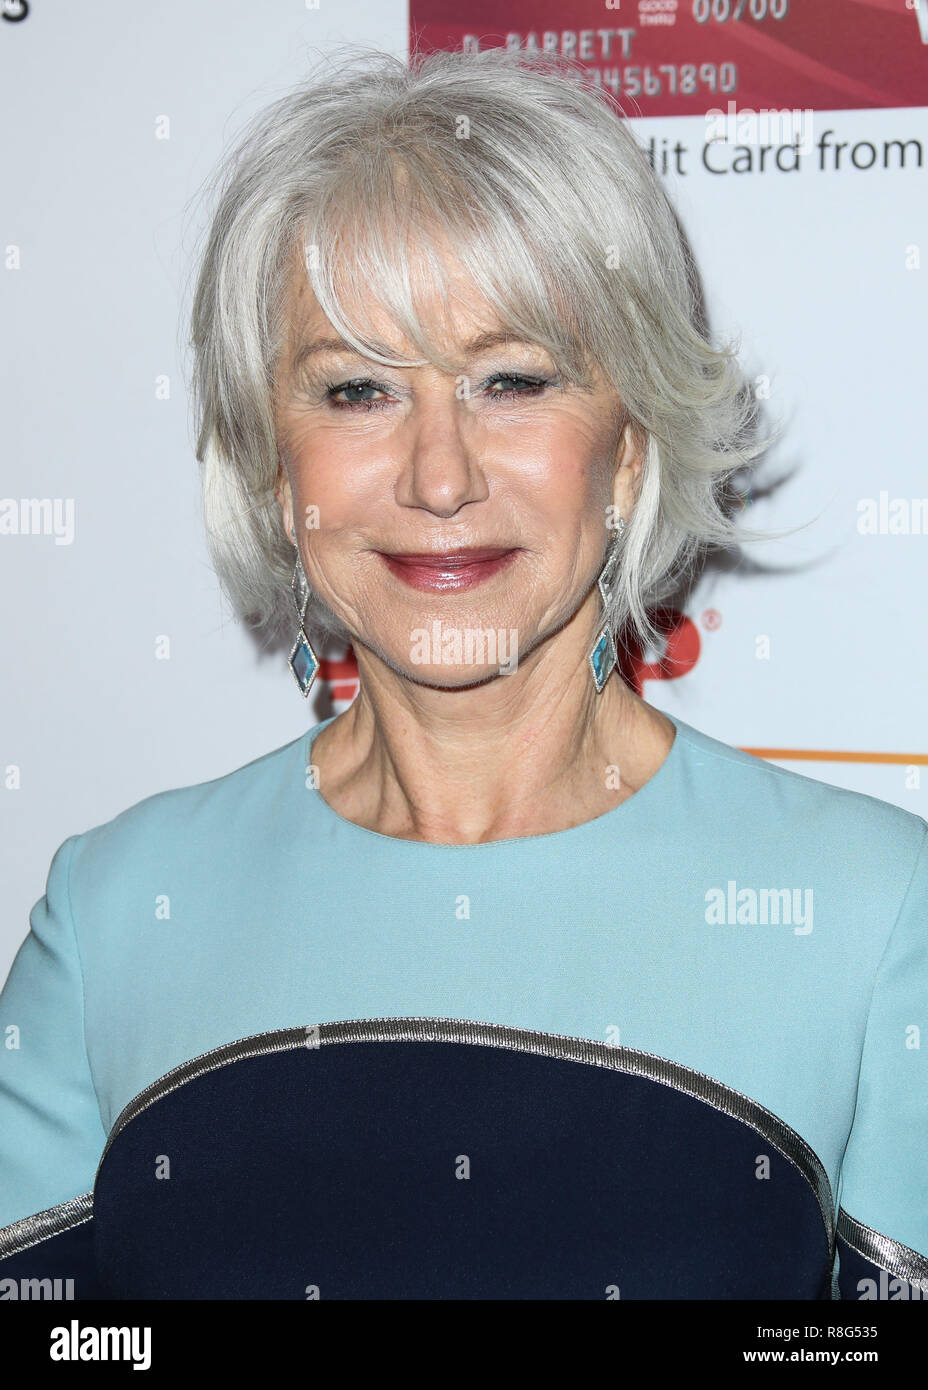 BEVERLY HILLS, LOS ANGELES, CA, USA - FEBRUARY 05: Helen Mirren at AARP's 17th Annual Movies For Grownups Awards held at The Beverly Wilshire Beverly Hills (A Four Seasons Hotel) on February 5, 2018 in Beverly Hills, Los Angeles, California, United States. (Photo by Xavier Collin/Image Press Agency) Stock Photo